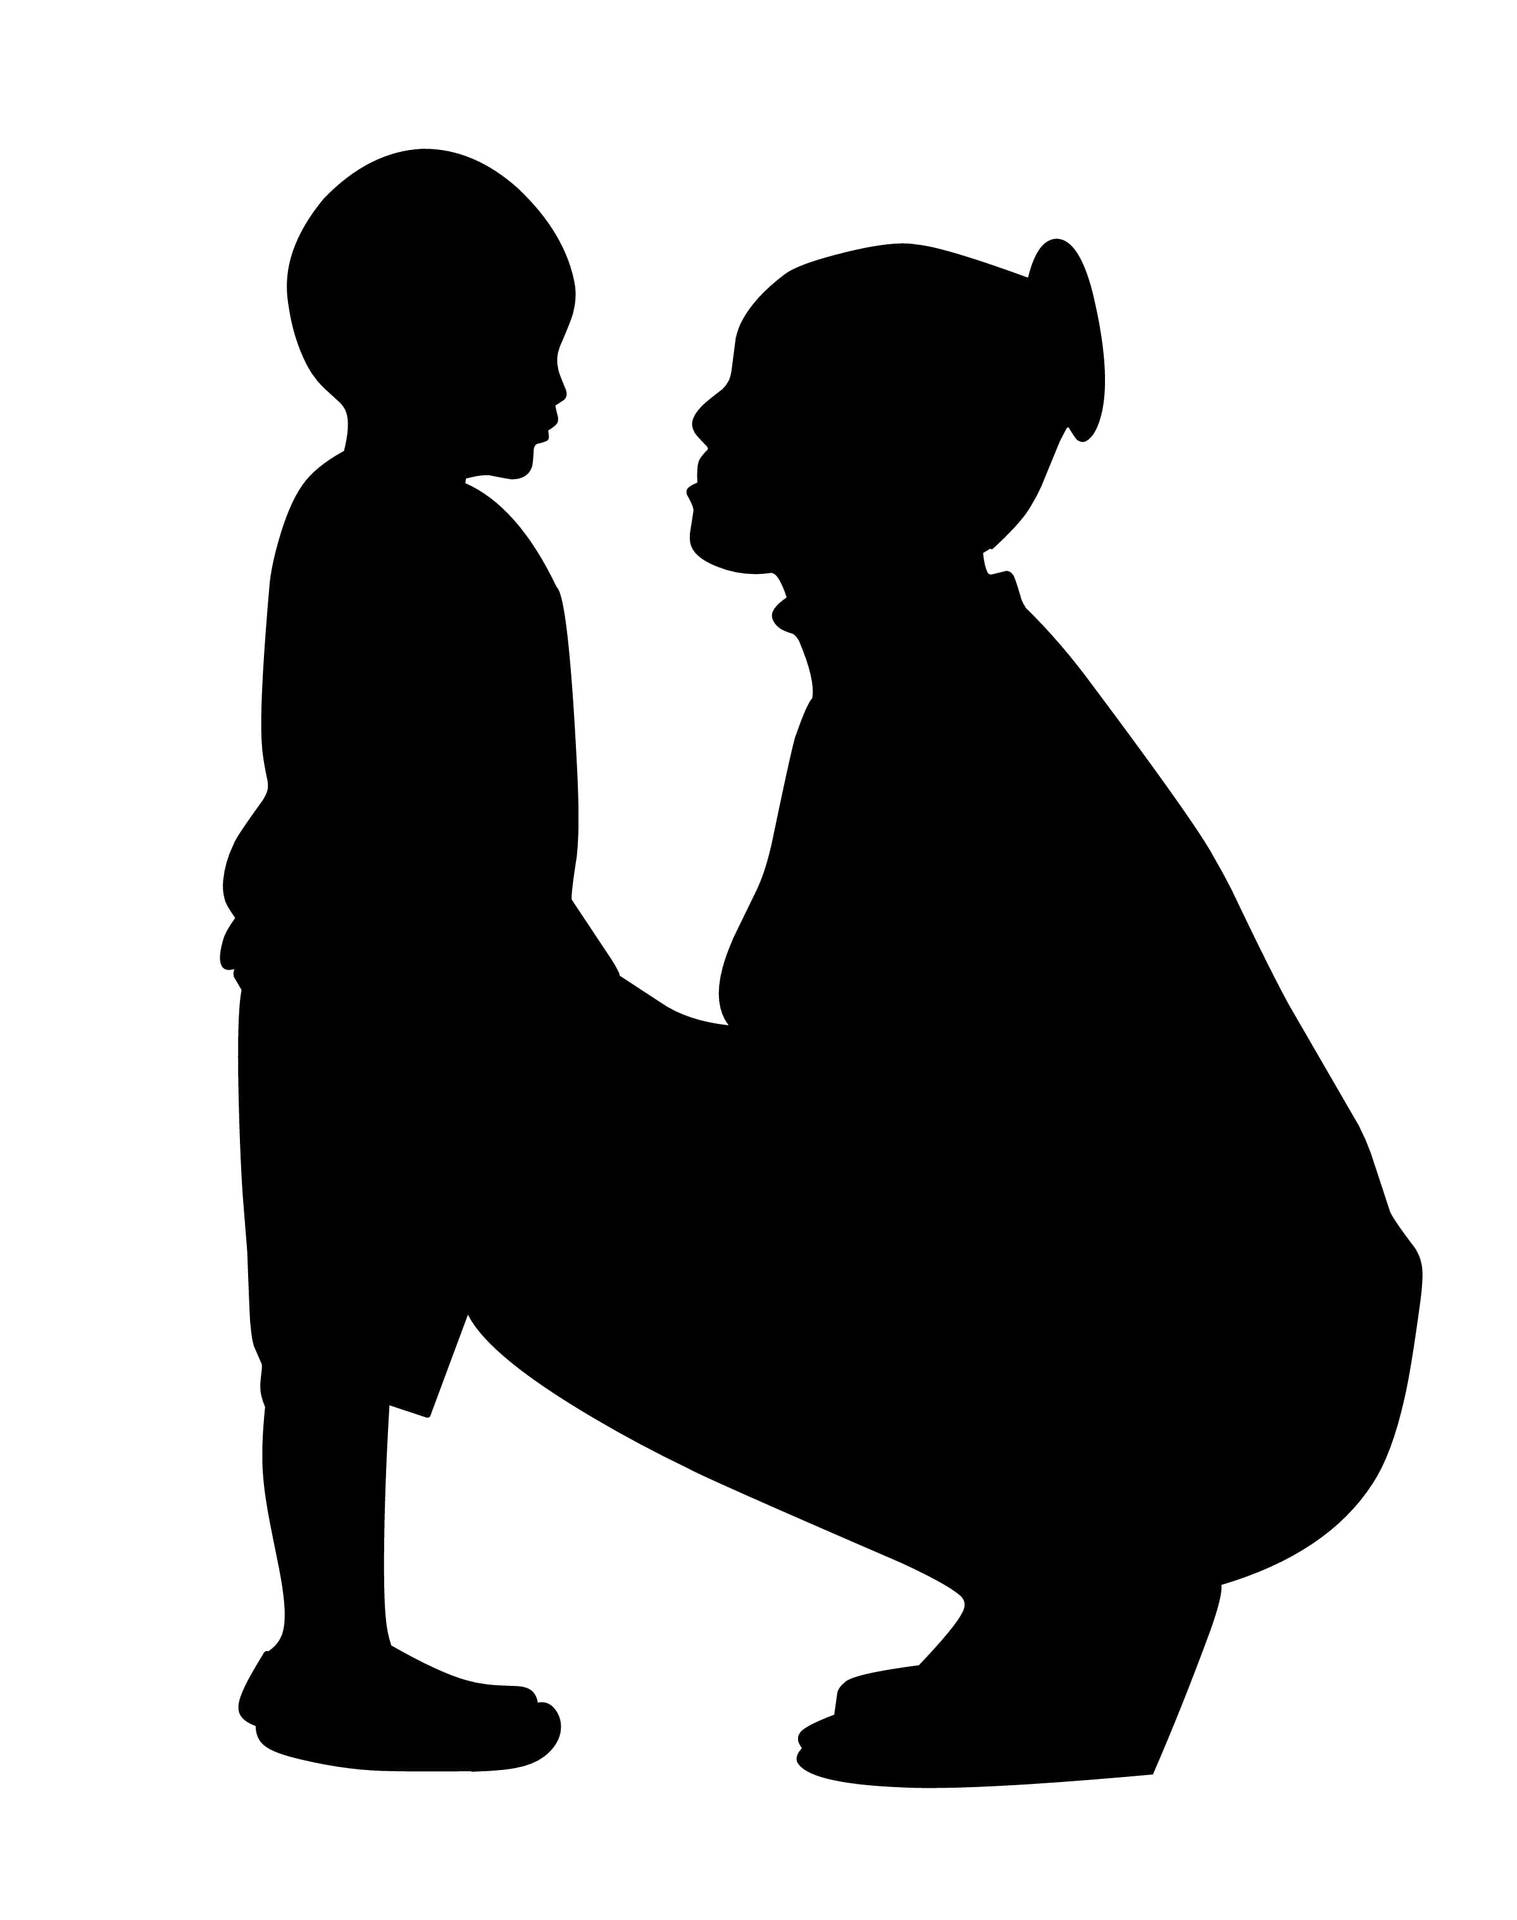 Mom and Son Silhouette Art Wallpaper